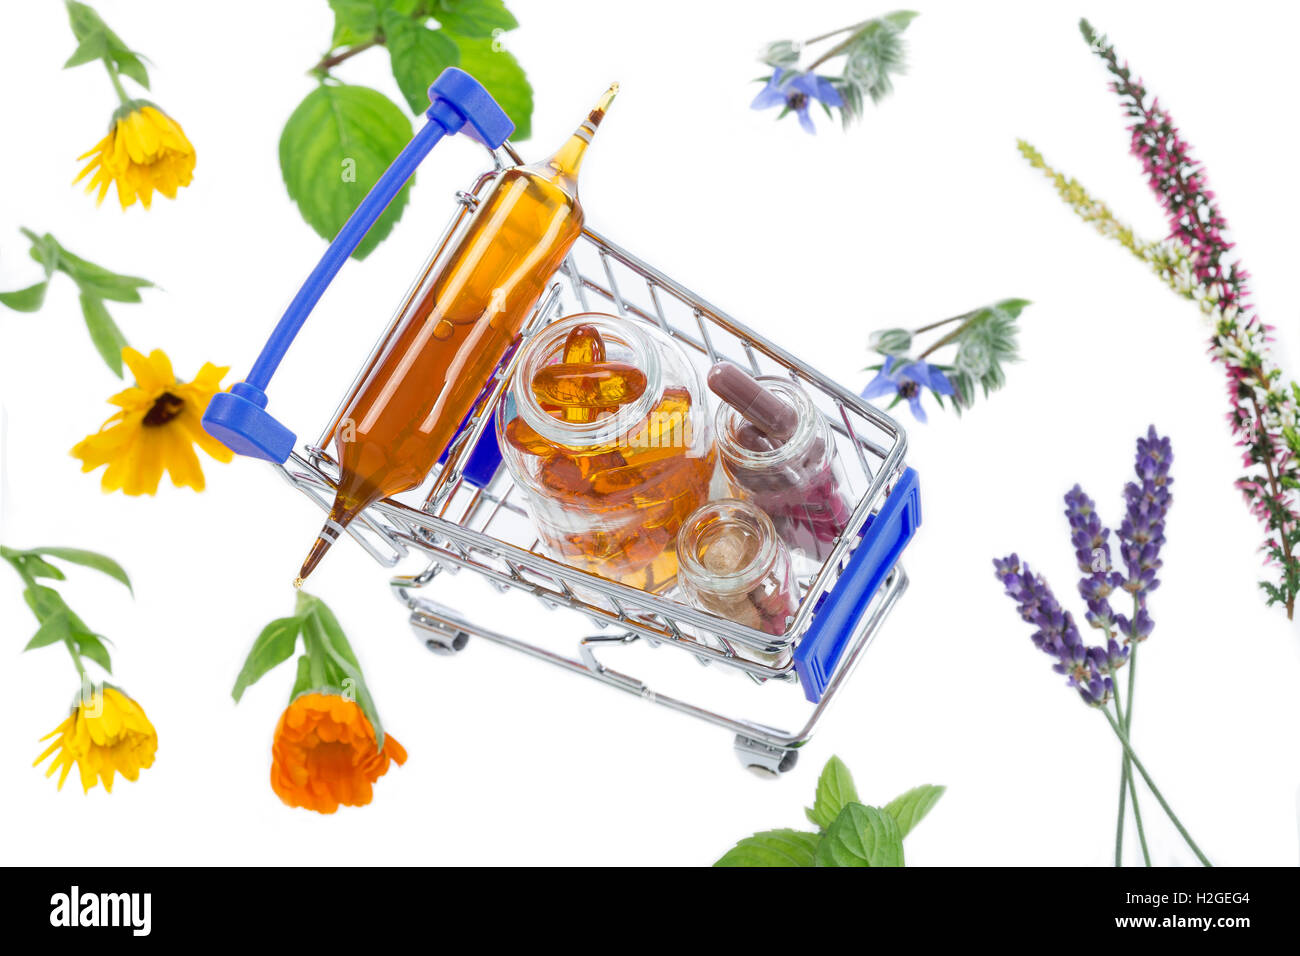 Shopping cart full of pharmaceutical drug and medicine pills over medicinal plants Stock Photo